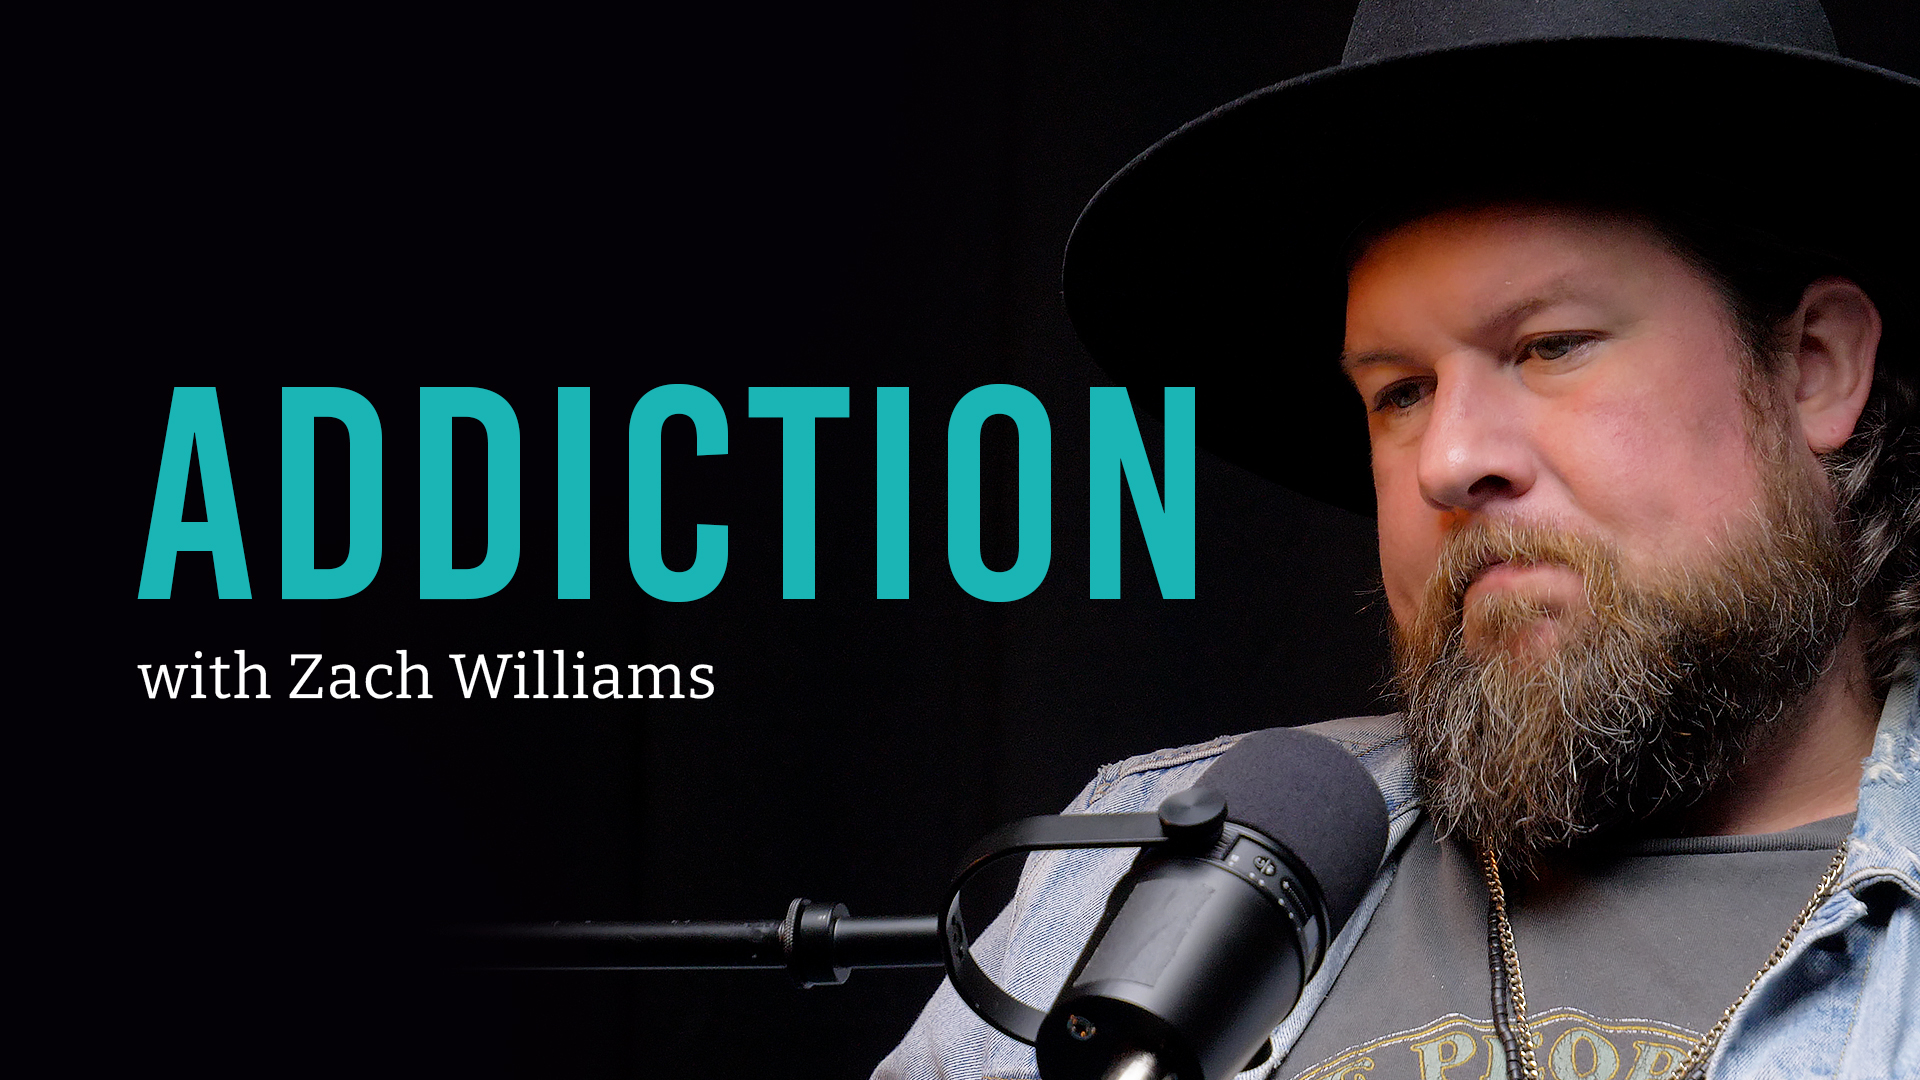 Zach Williams’ addiction story and how God radically transformed his life